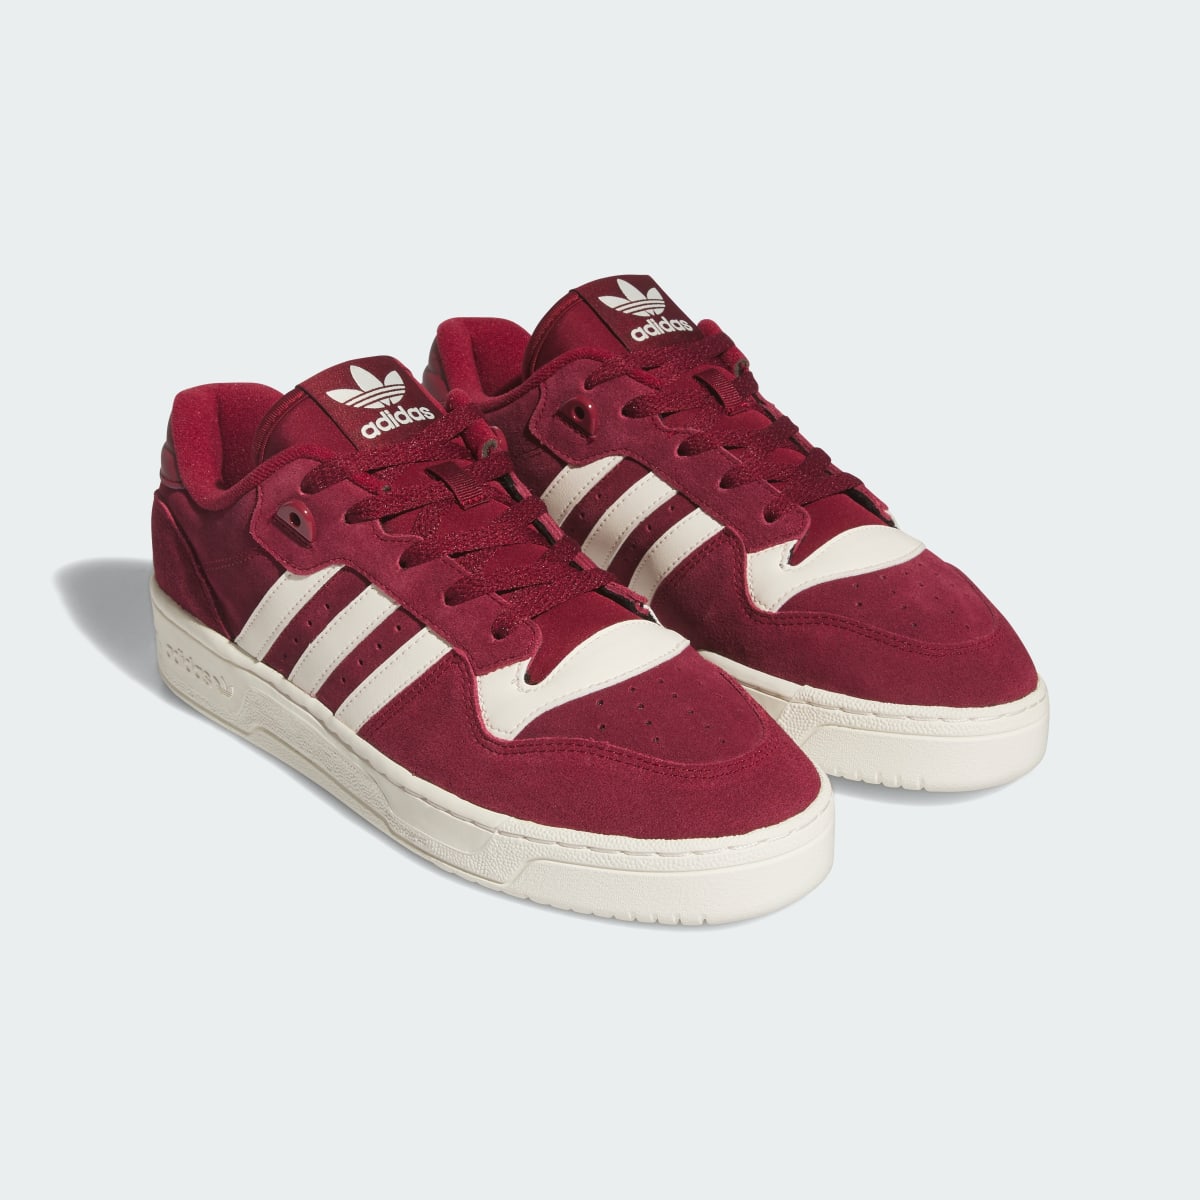 Adidas Rivalry Low Shoes. 5